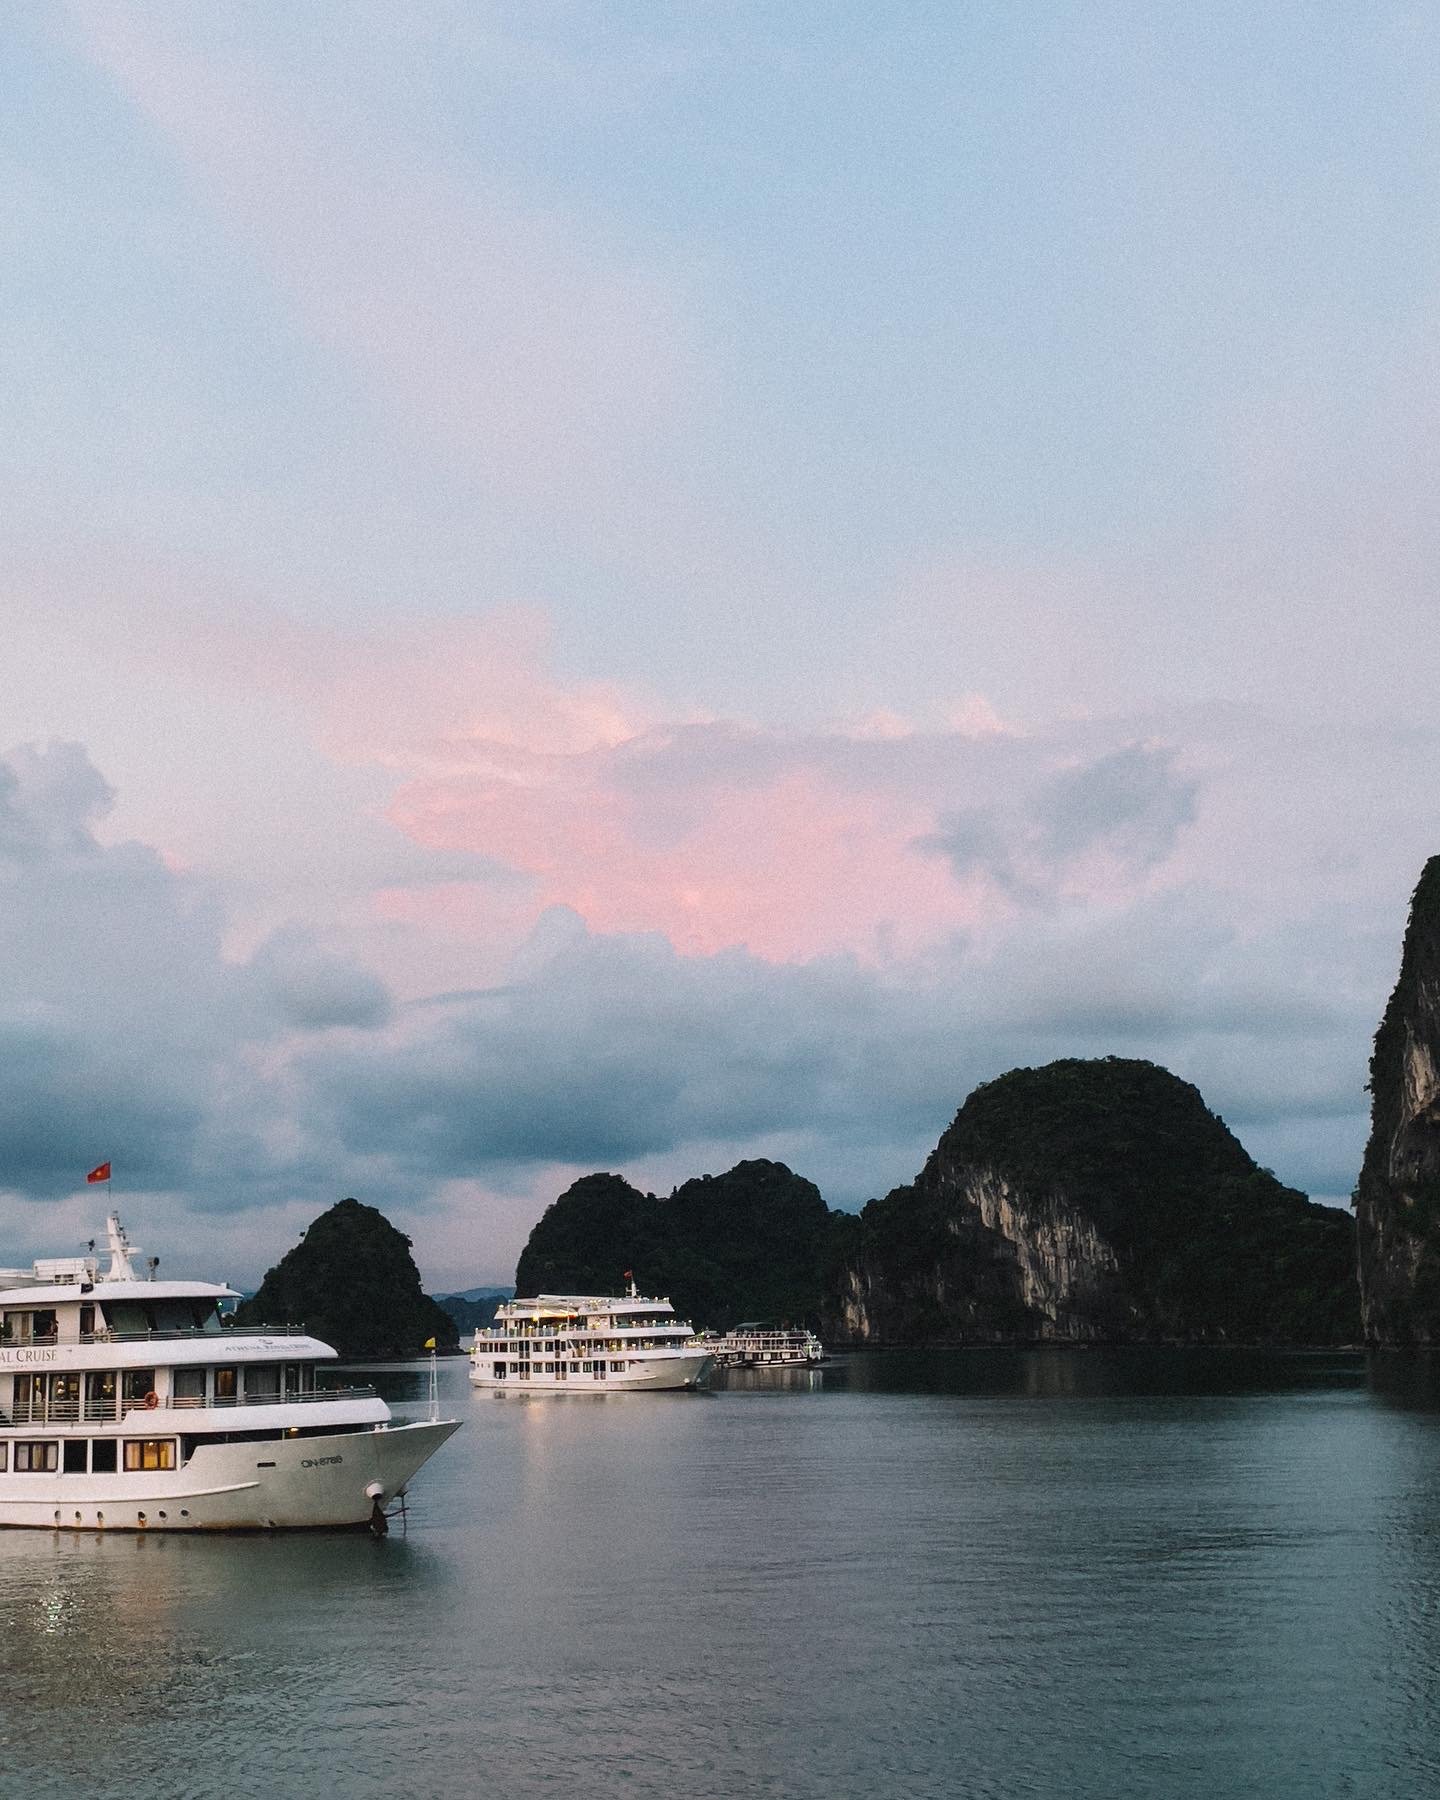 How to visit Halong Bay 